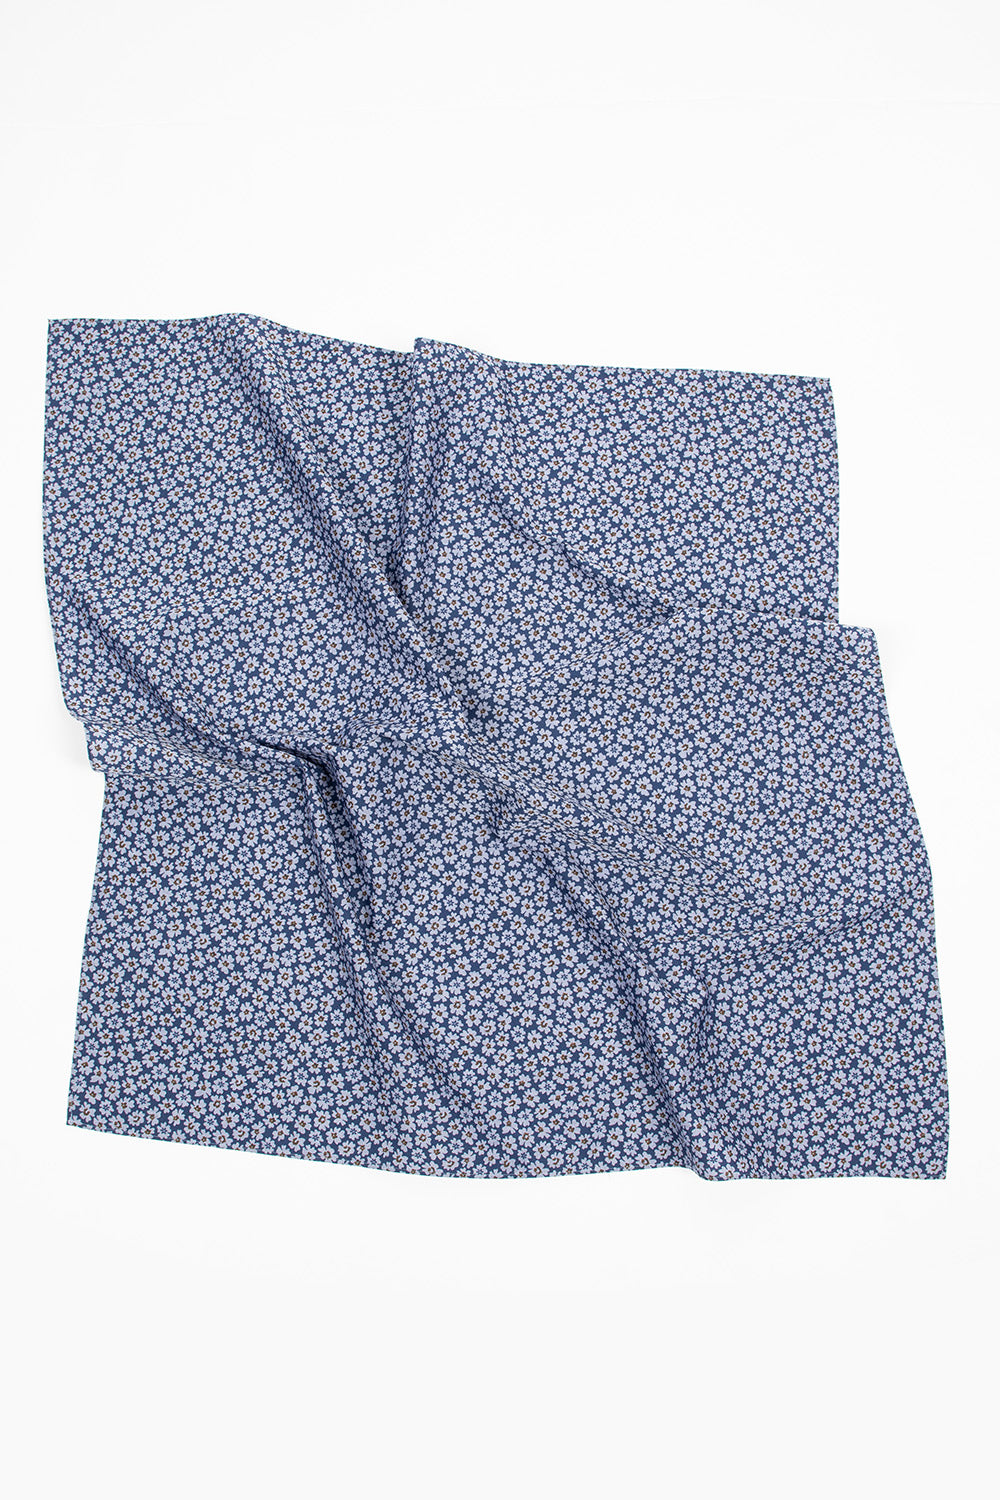 Chambray Floral Scarf Dusty Blue